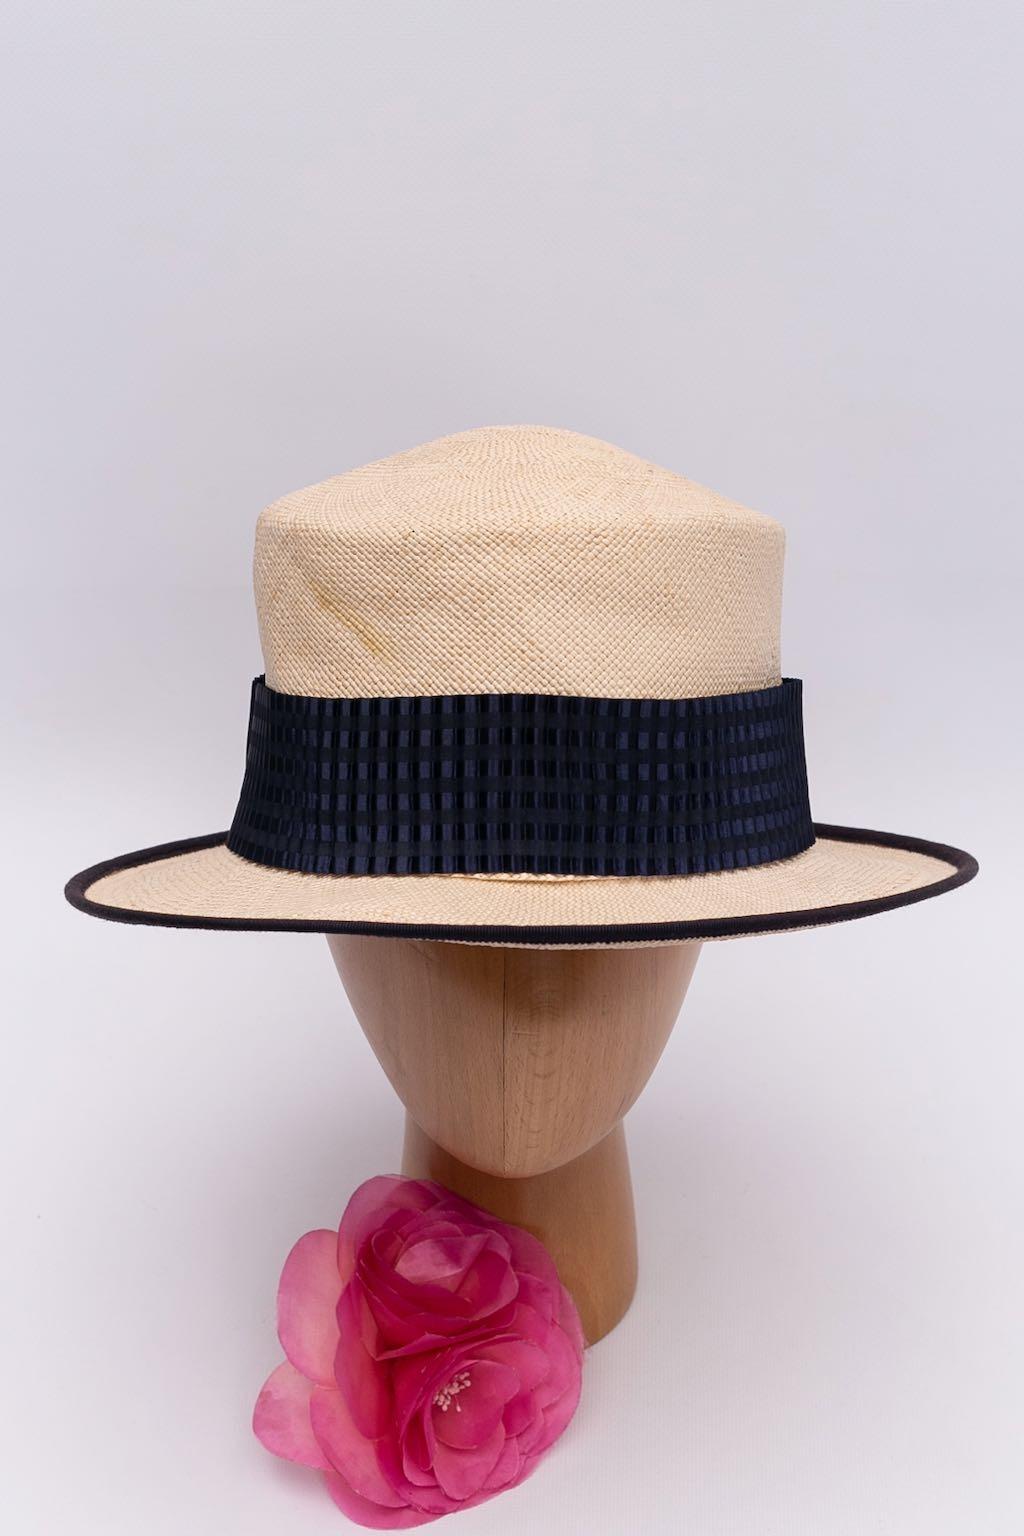 Yves Saint Laurent Boater Hat Decorated with a Pleated Navy Blue Ribbon For Sale 3